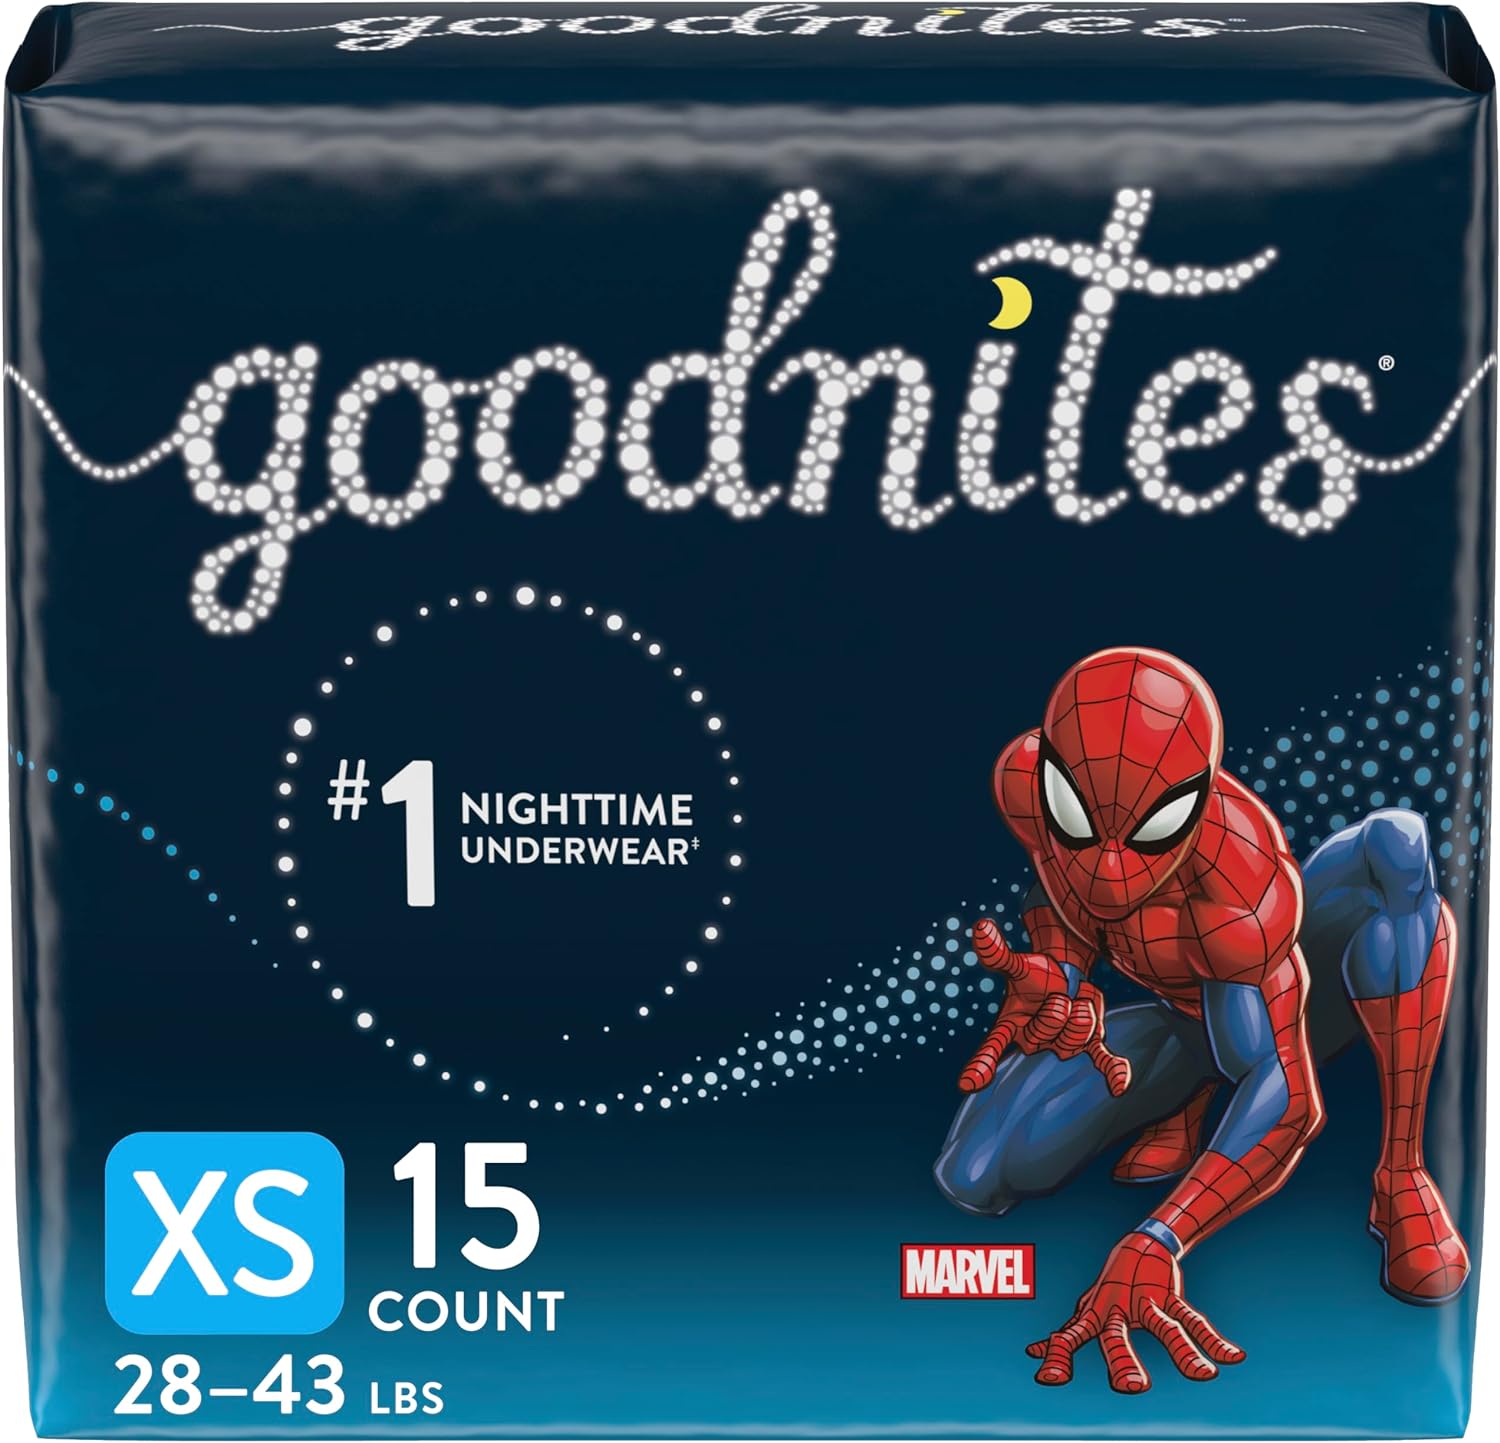 Goodnites Overnight Underwear for Boys, XS (28-43 lb.), 15 Ct - image 1 of 11